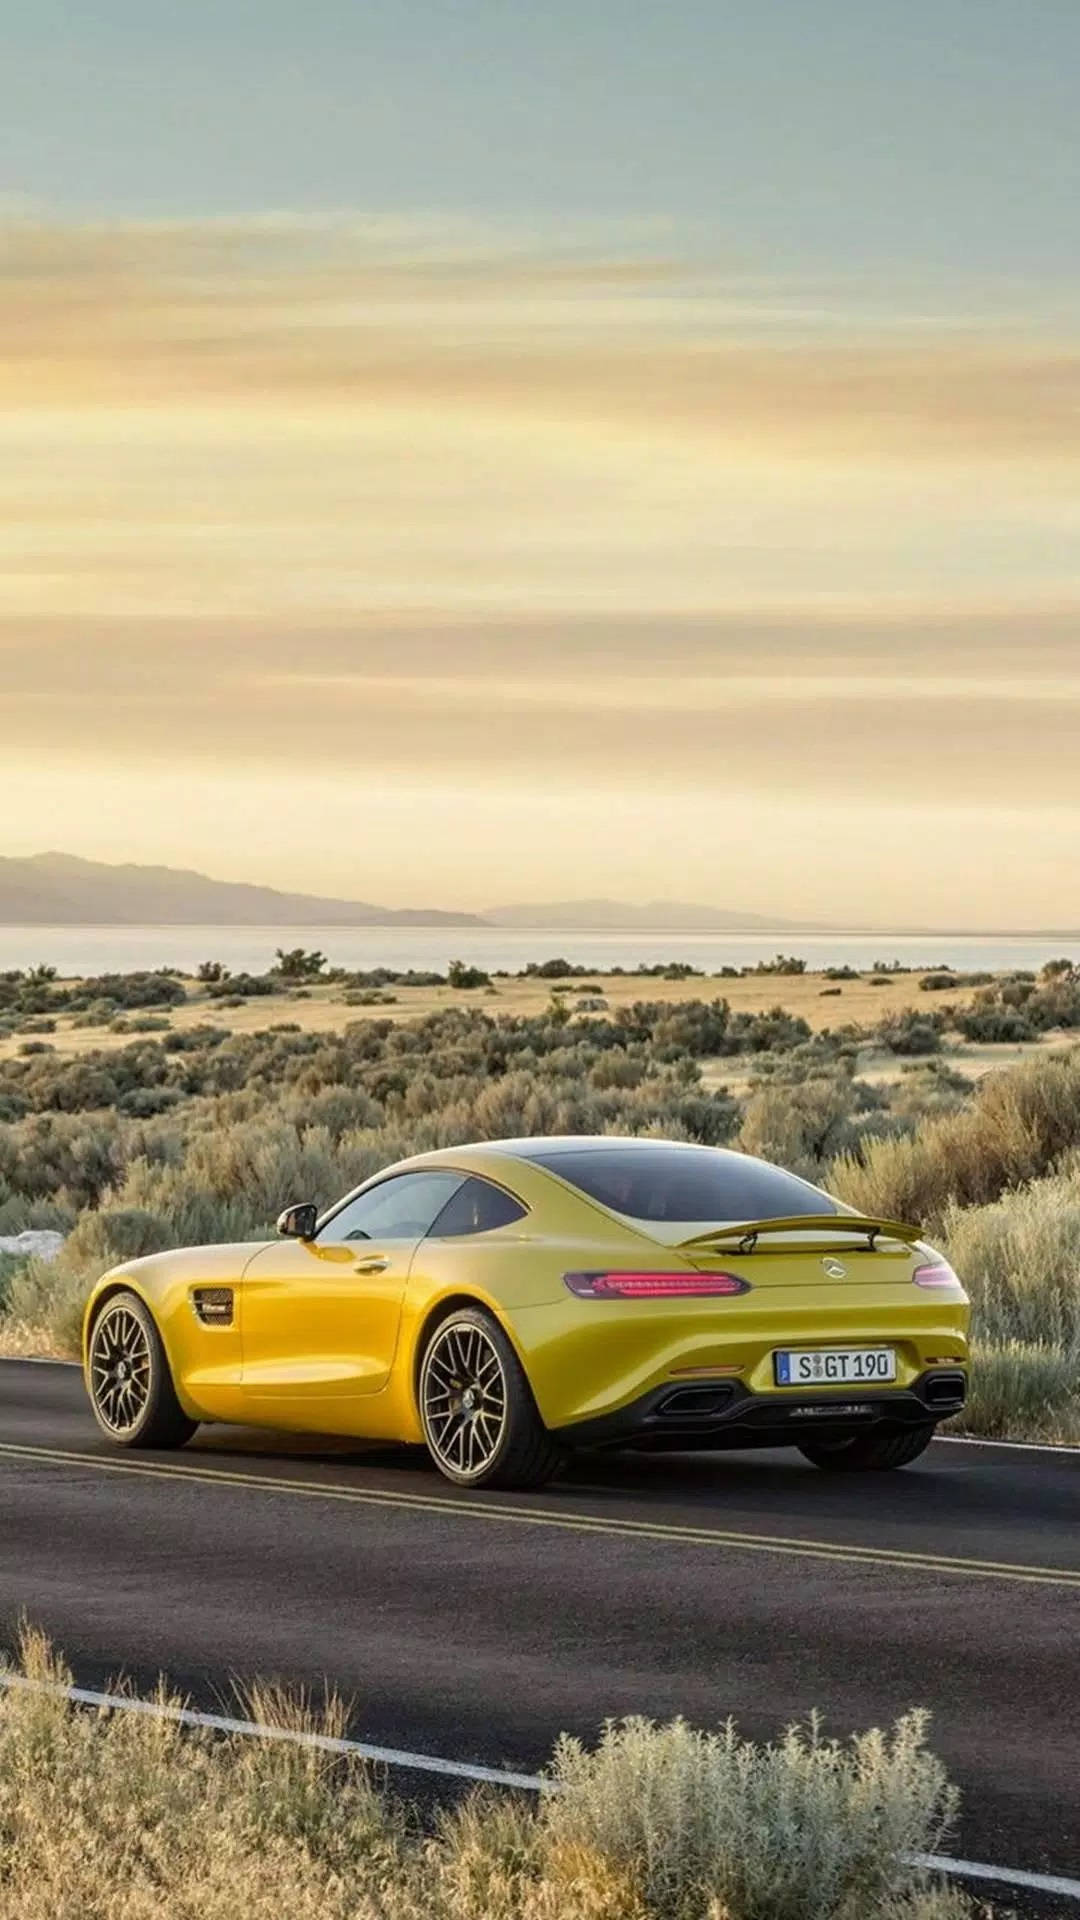 Exquisite Mercedes-amg Gt With Iphone X Entrenched In The Interior Background